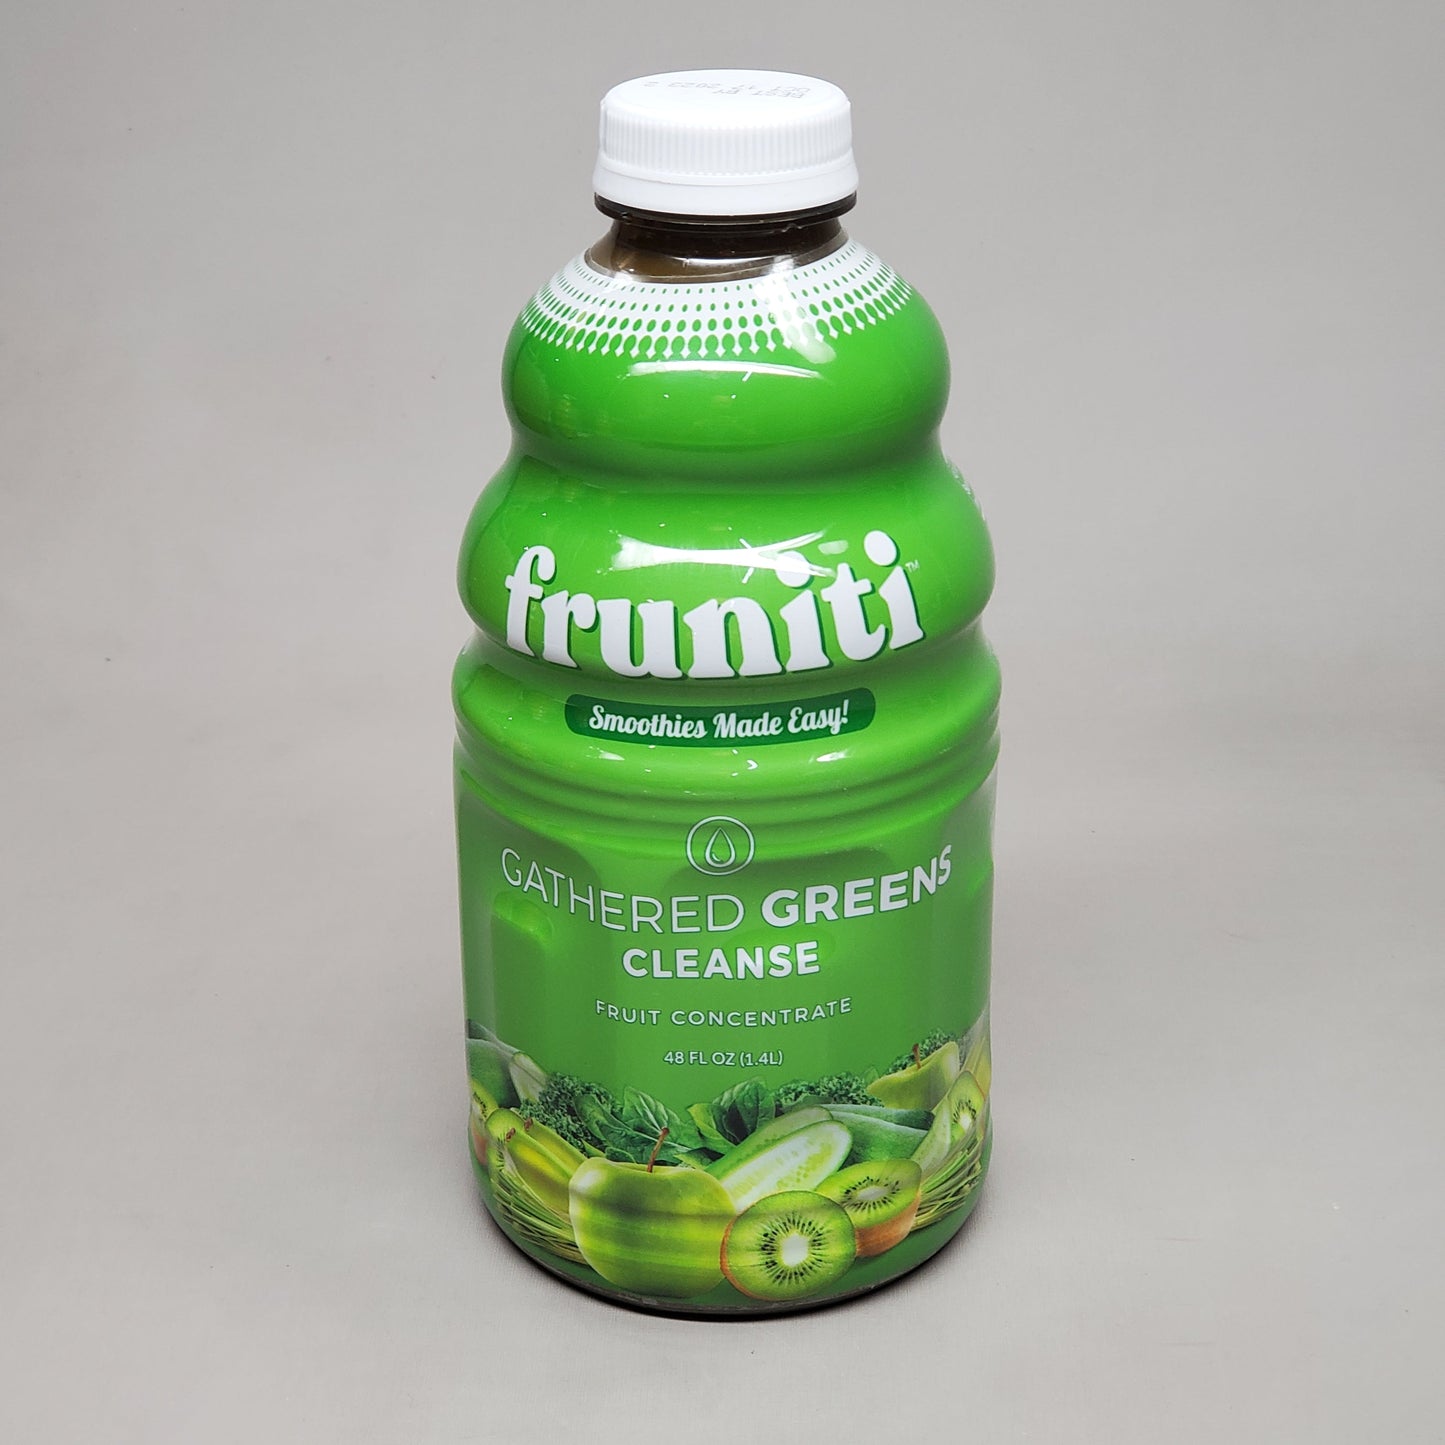 FRUNITI 6-PACK! Gathered Greens Cleans 48 fl oz Fruit Concentrate Smoothies Made Easy (10/23)